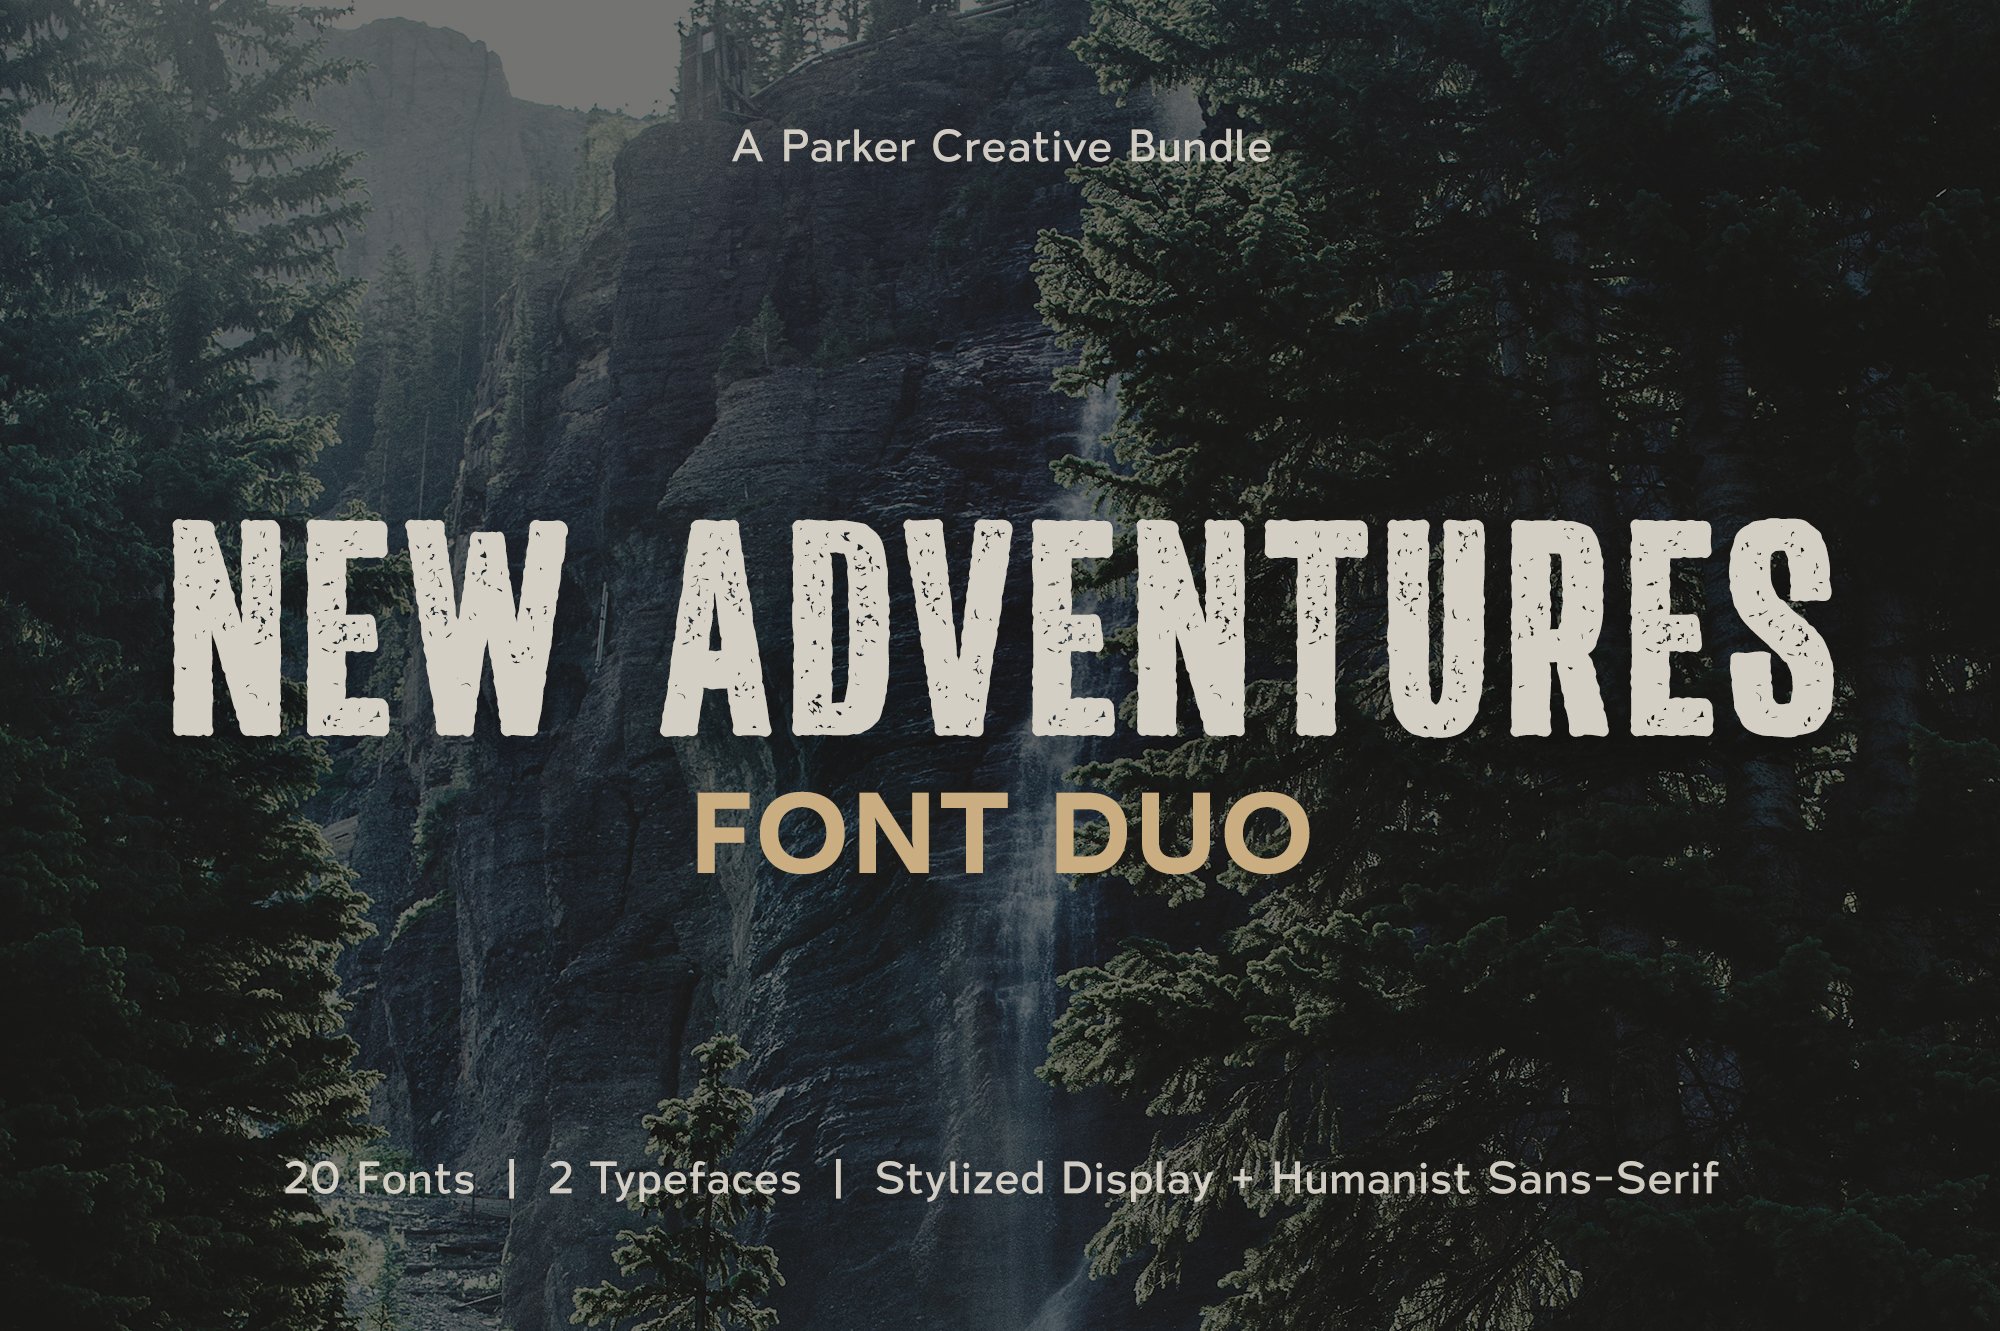 New Adventures Font Duo cover image.